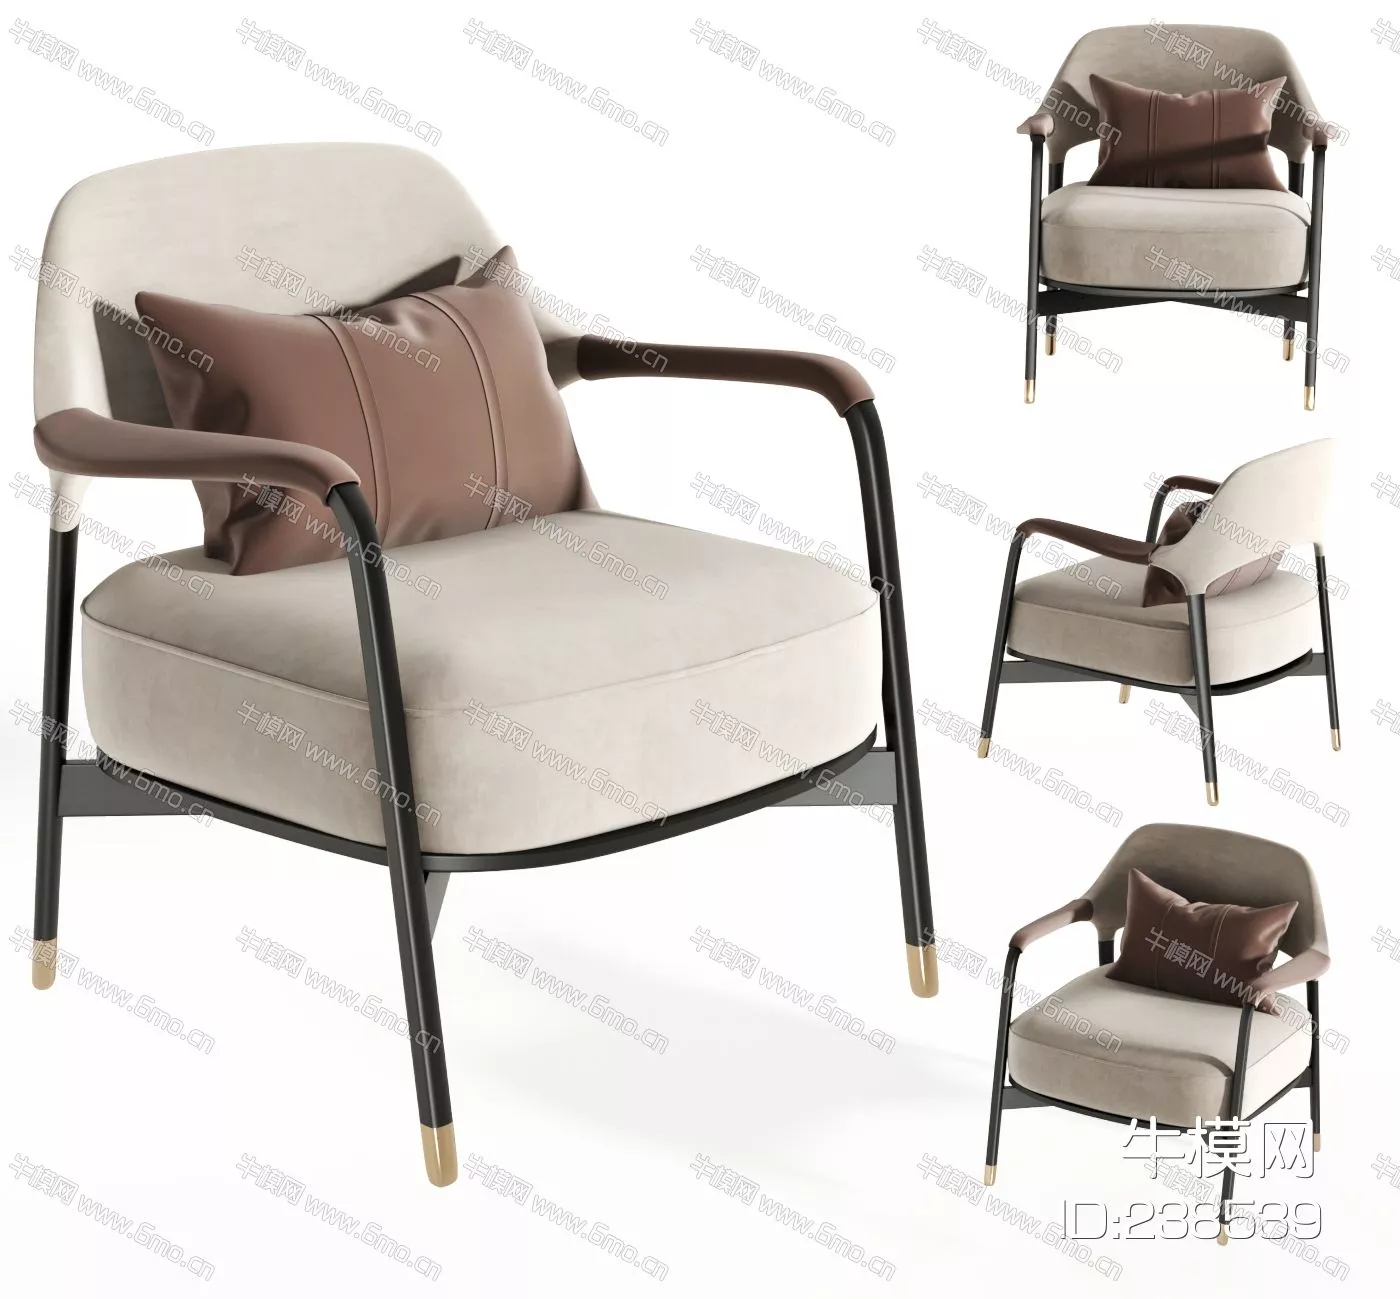 CHINESE LOUNGLE CHAIR - SKETCHUP 3D MODEL - VRAY - 238539